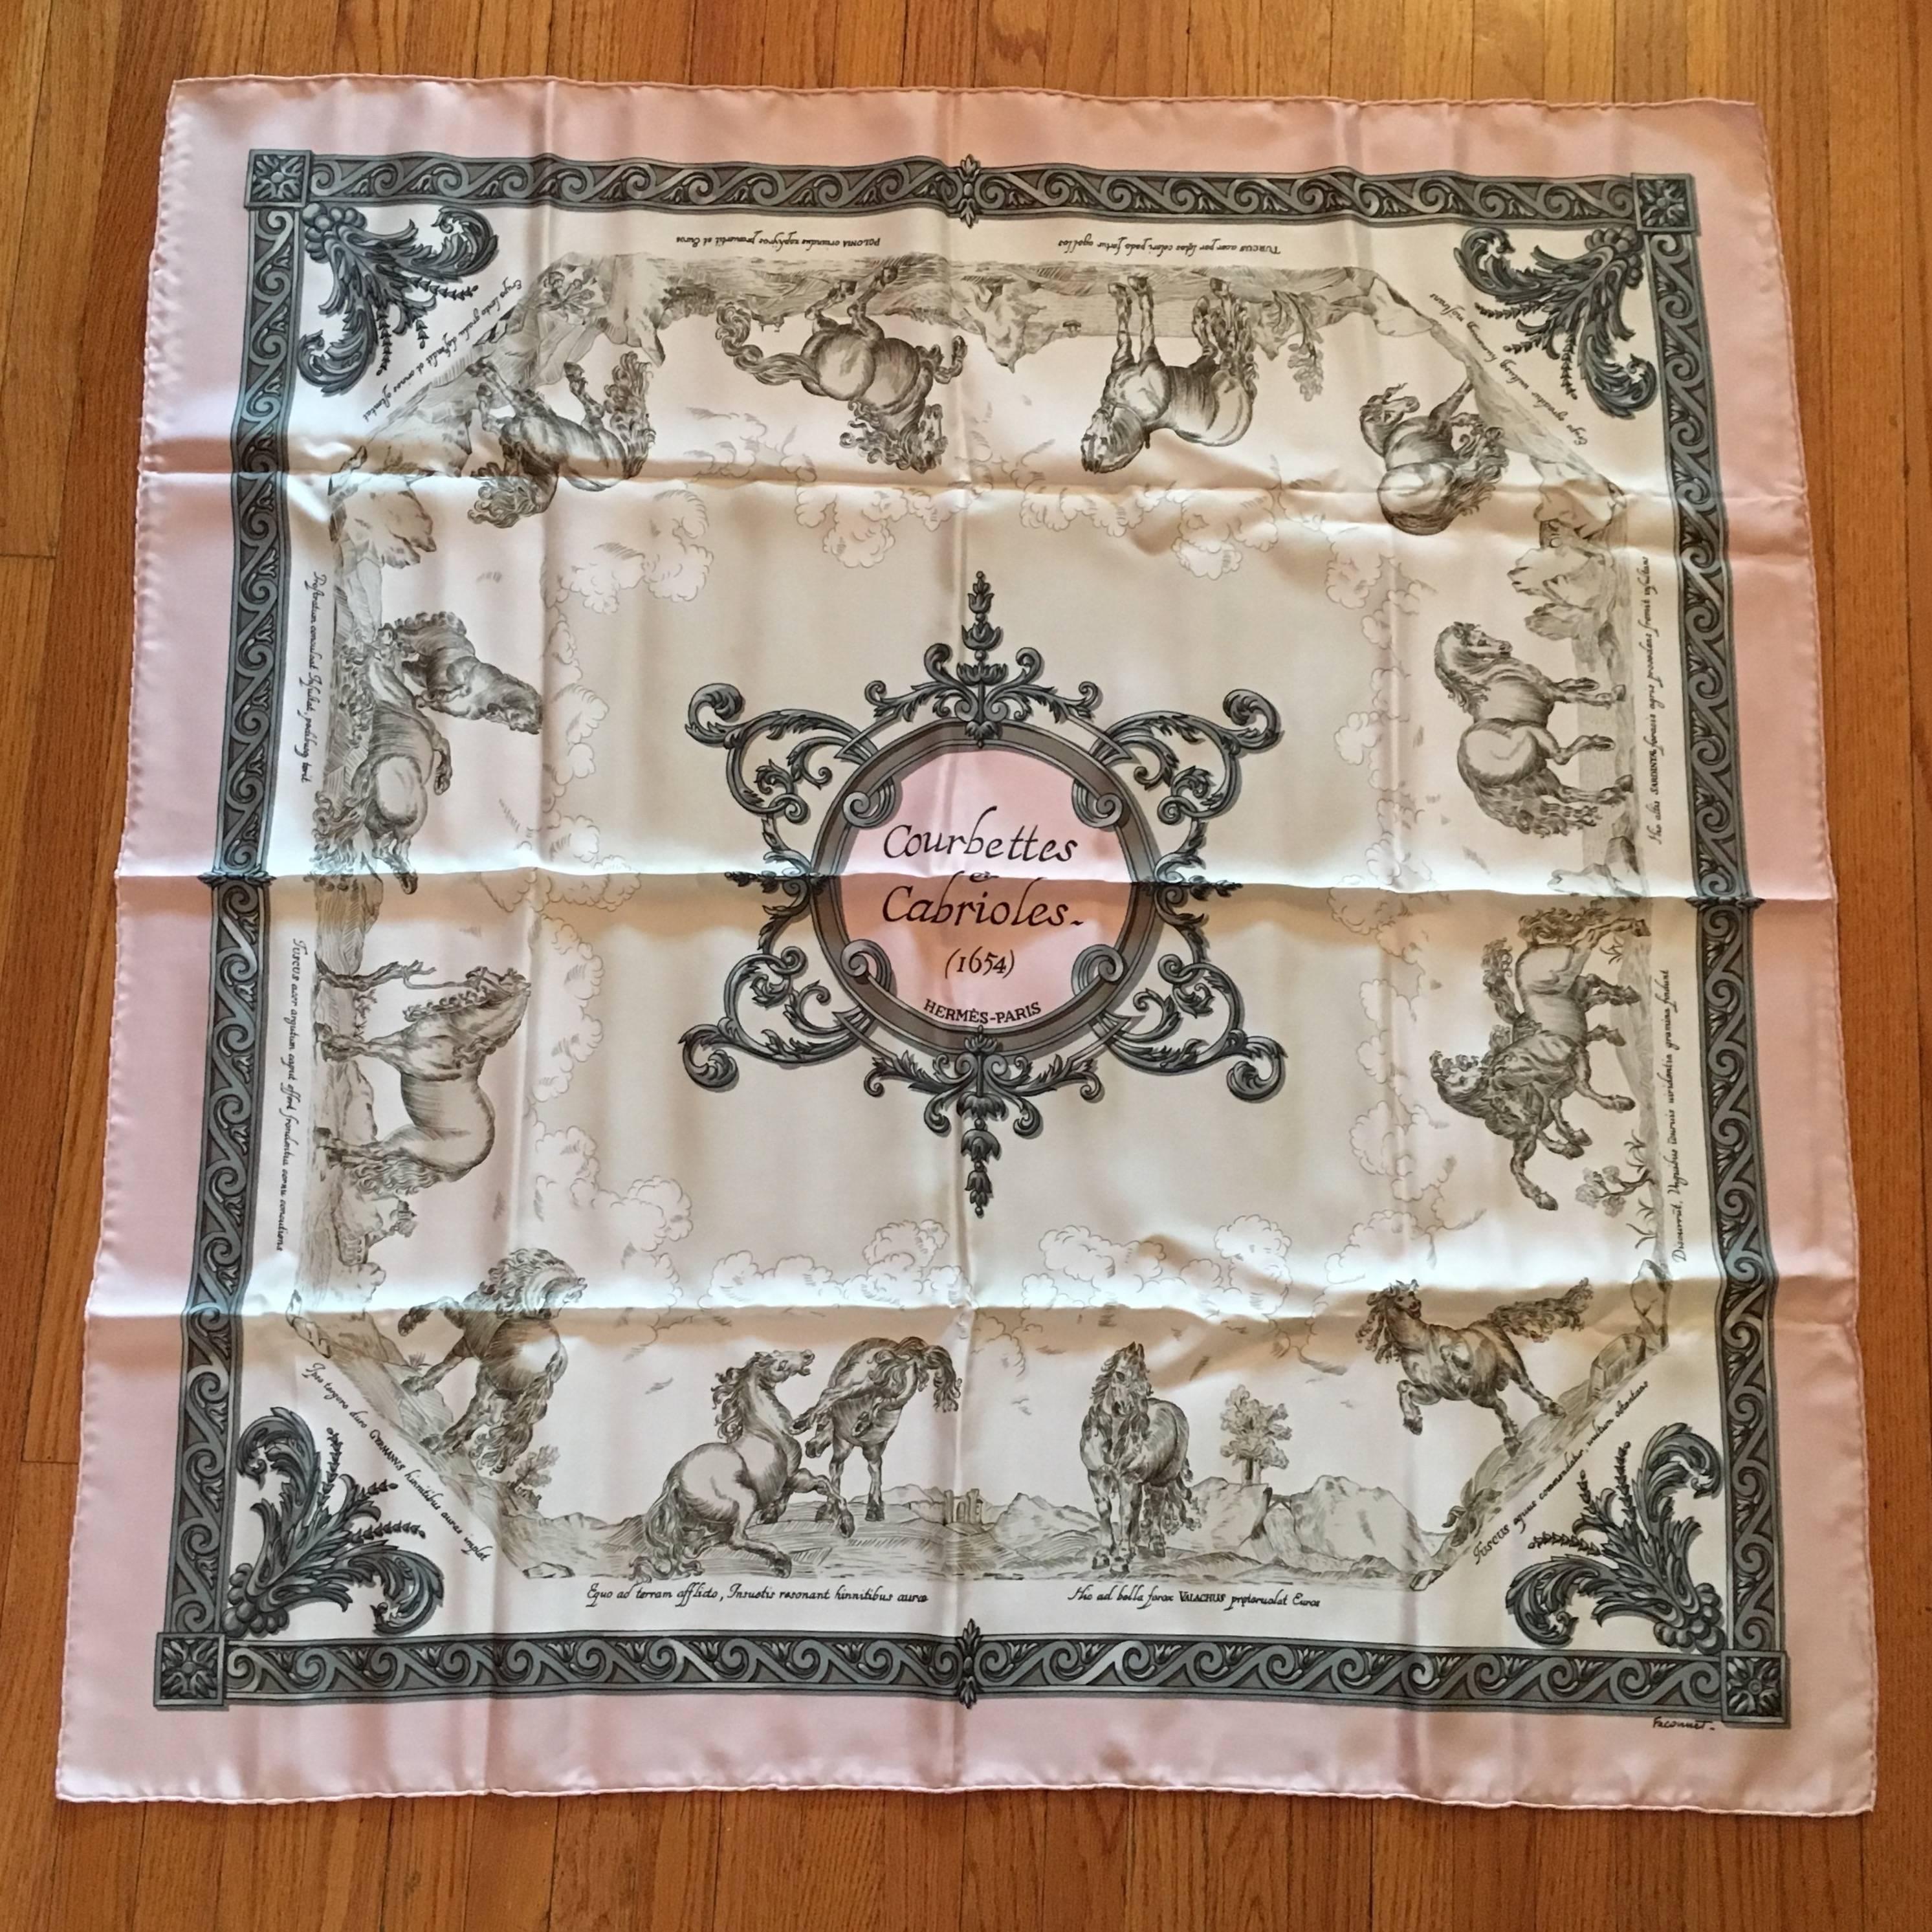 This is a beautiful vintage Courbettes et Cabrioles print Hermes scarf in subtle shades of pink and grey. It is in excellent condition and measures 35